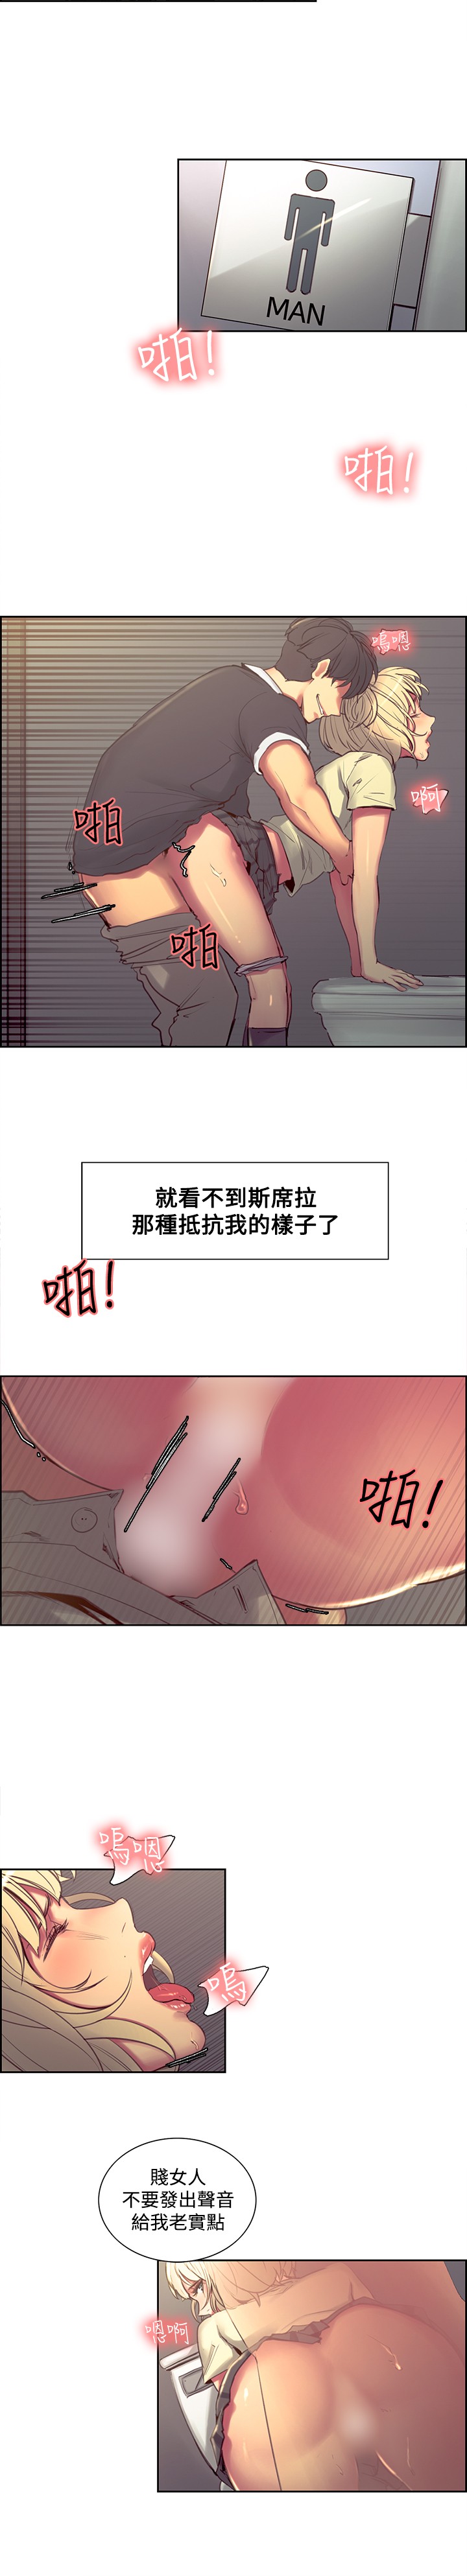 [Serious] Domesticate the Housekeeper 调教家政妇 Ch.29~41 [Chinese]中文 page 21 full